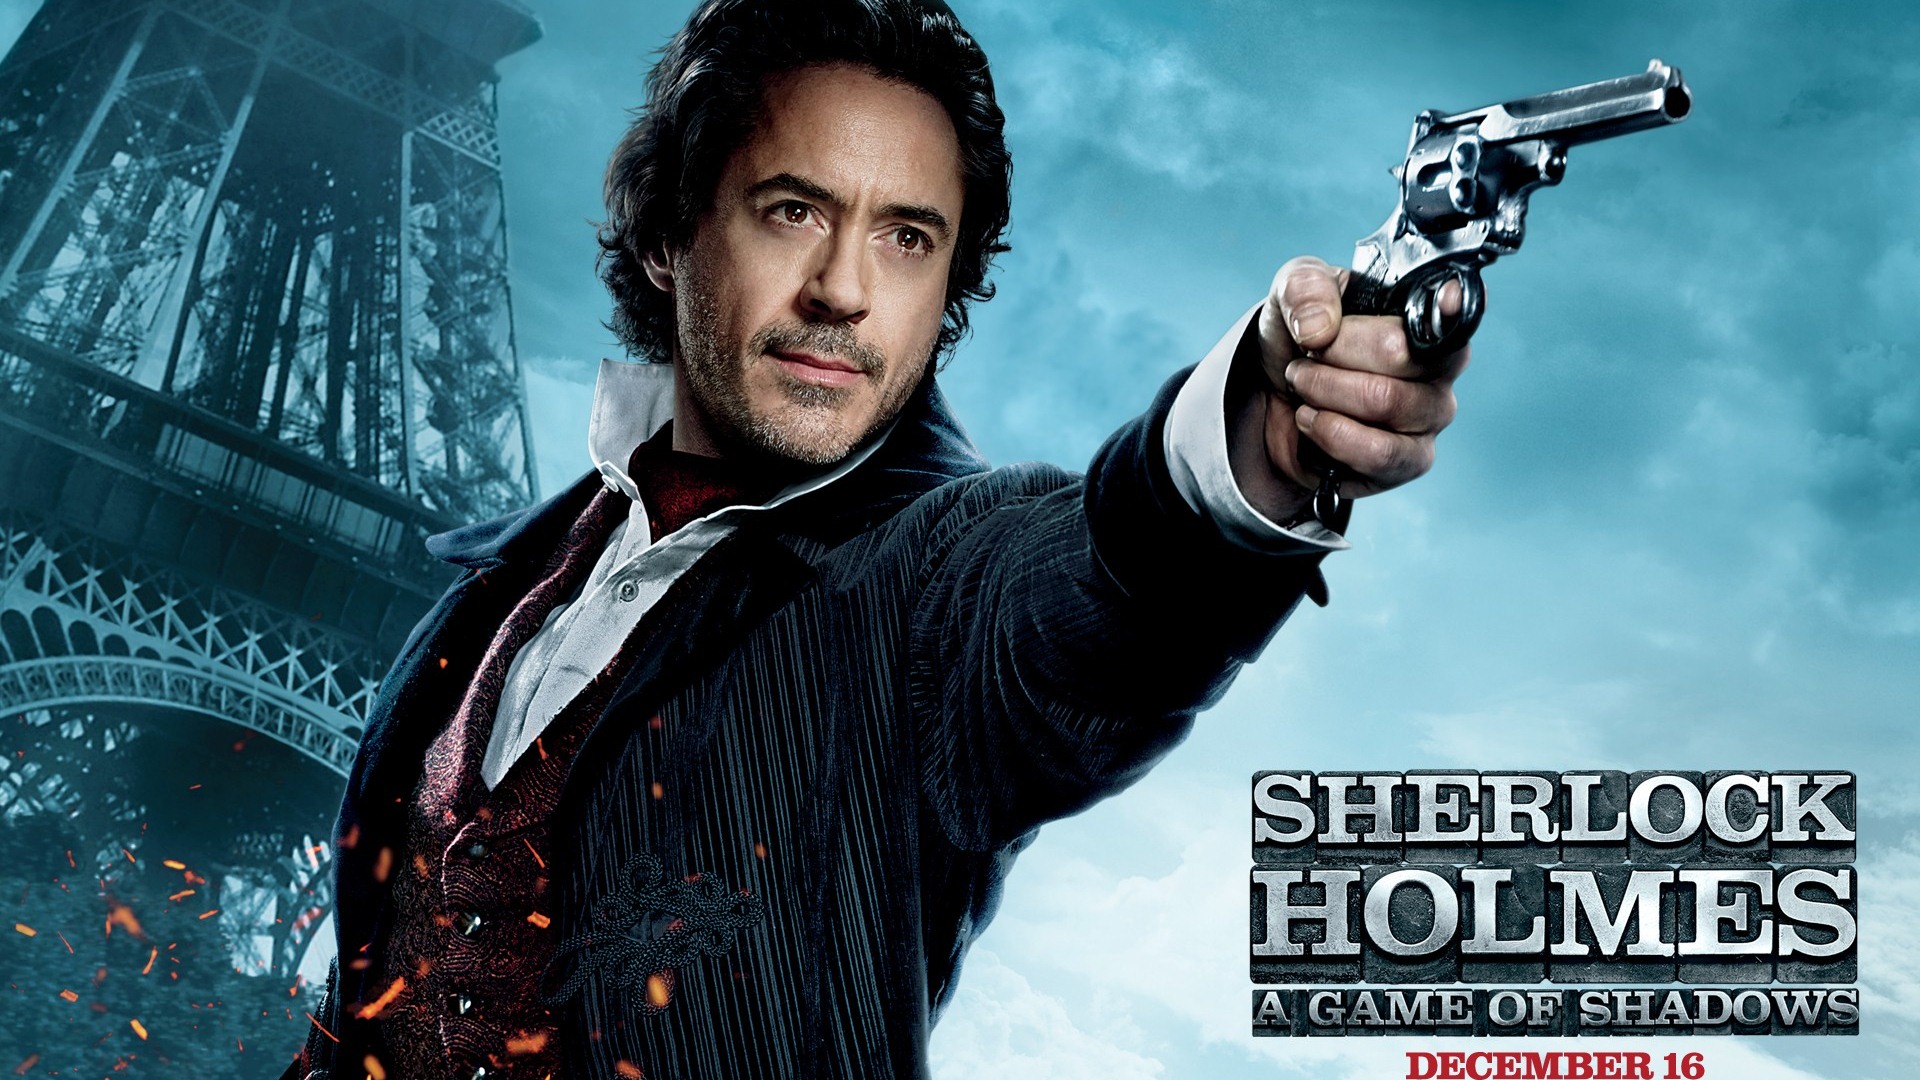 Sherlock Holmes: A Game of Shadows HD wallpapers #2 - 1920x1080